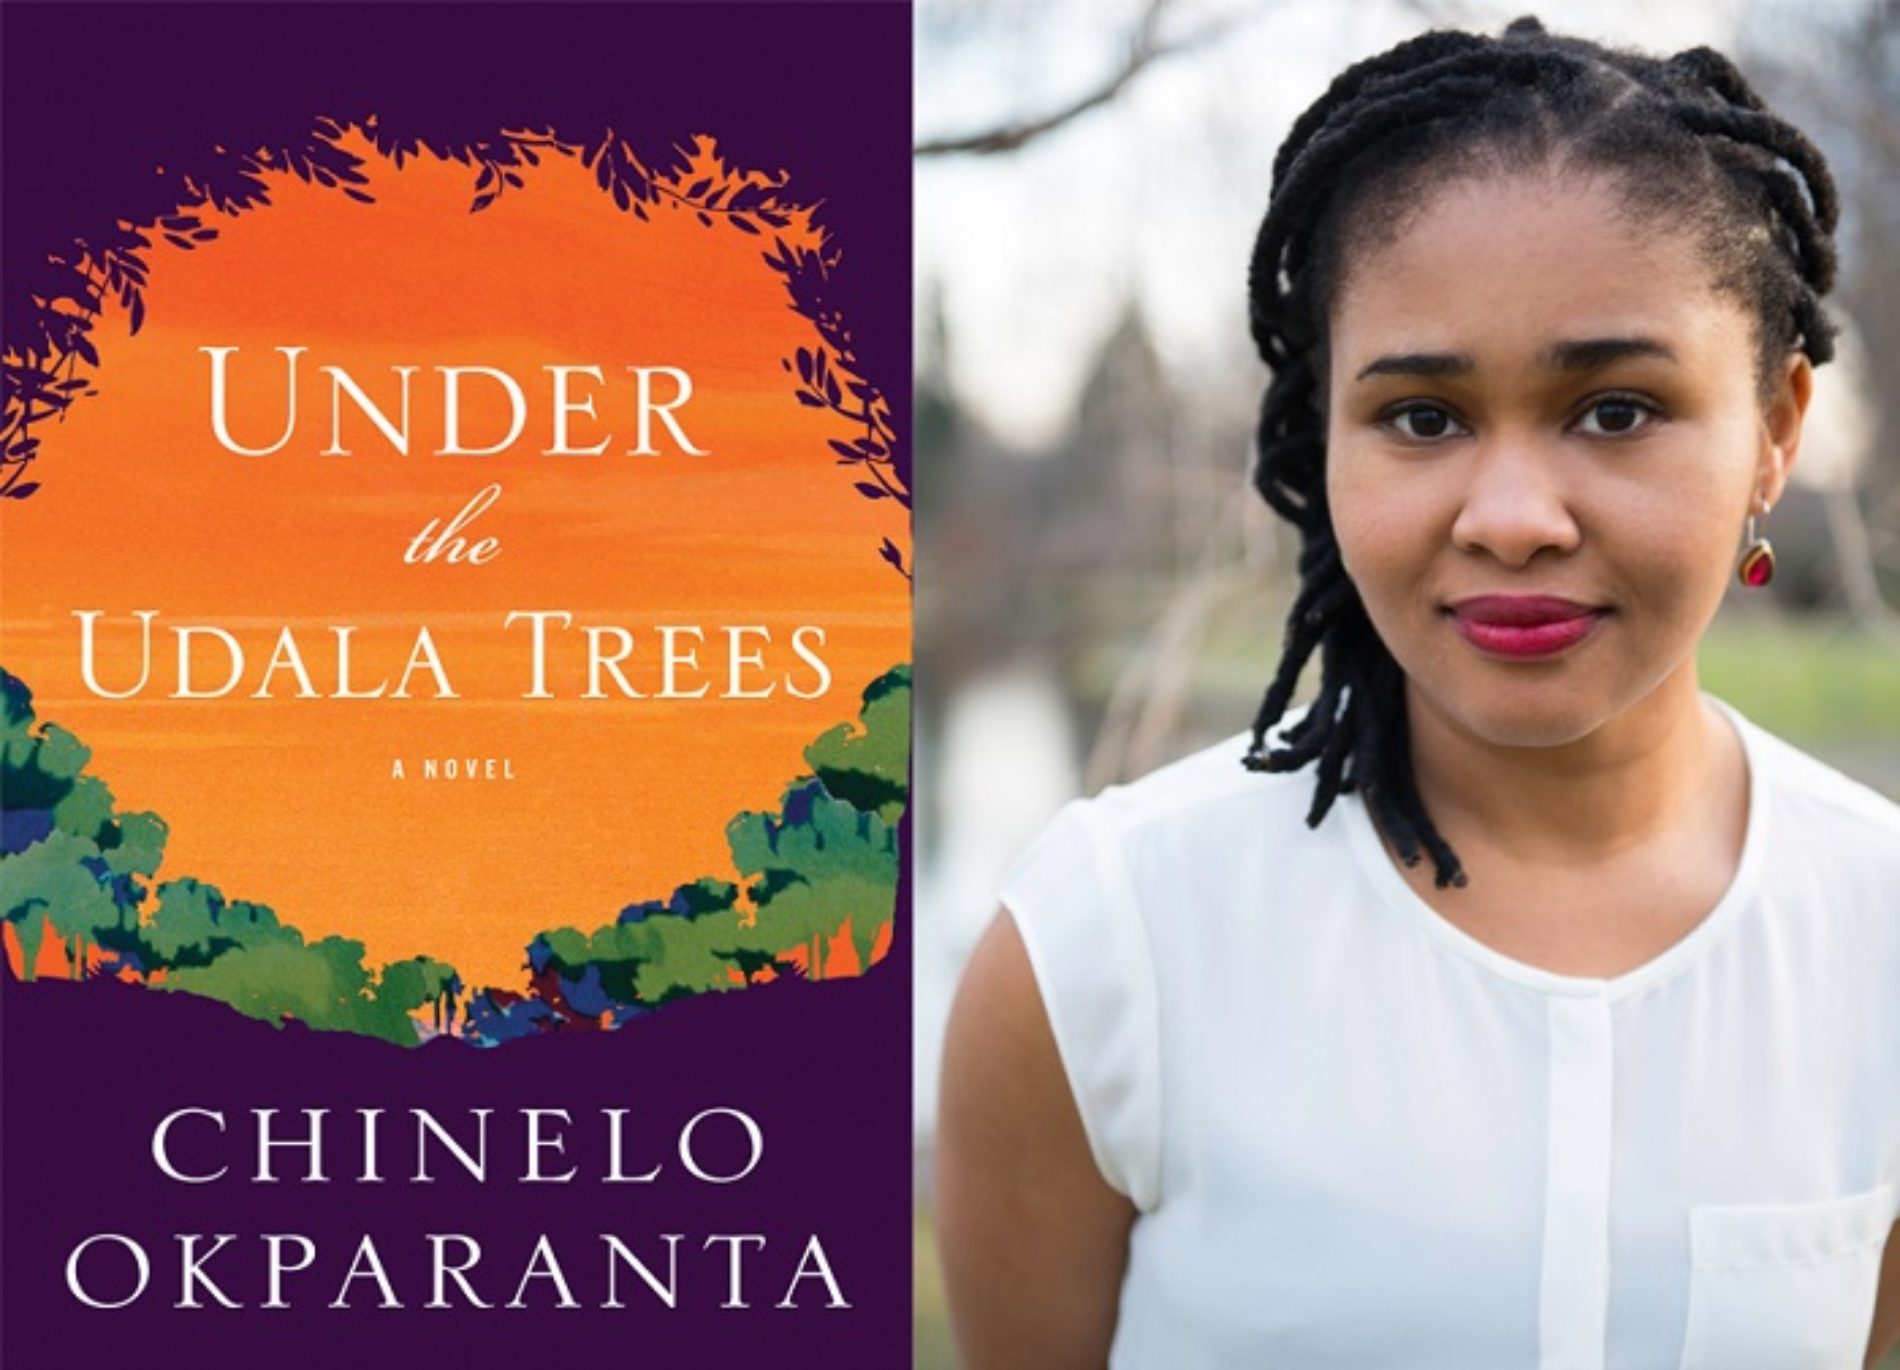 Chinelo Okparanta Gets Candid About Her Novel, ‘Under the Udala Trees’